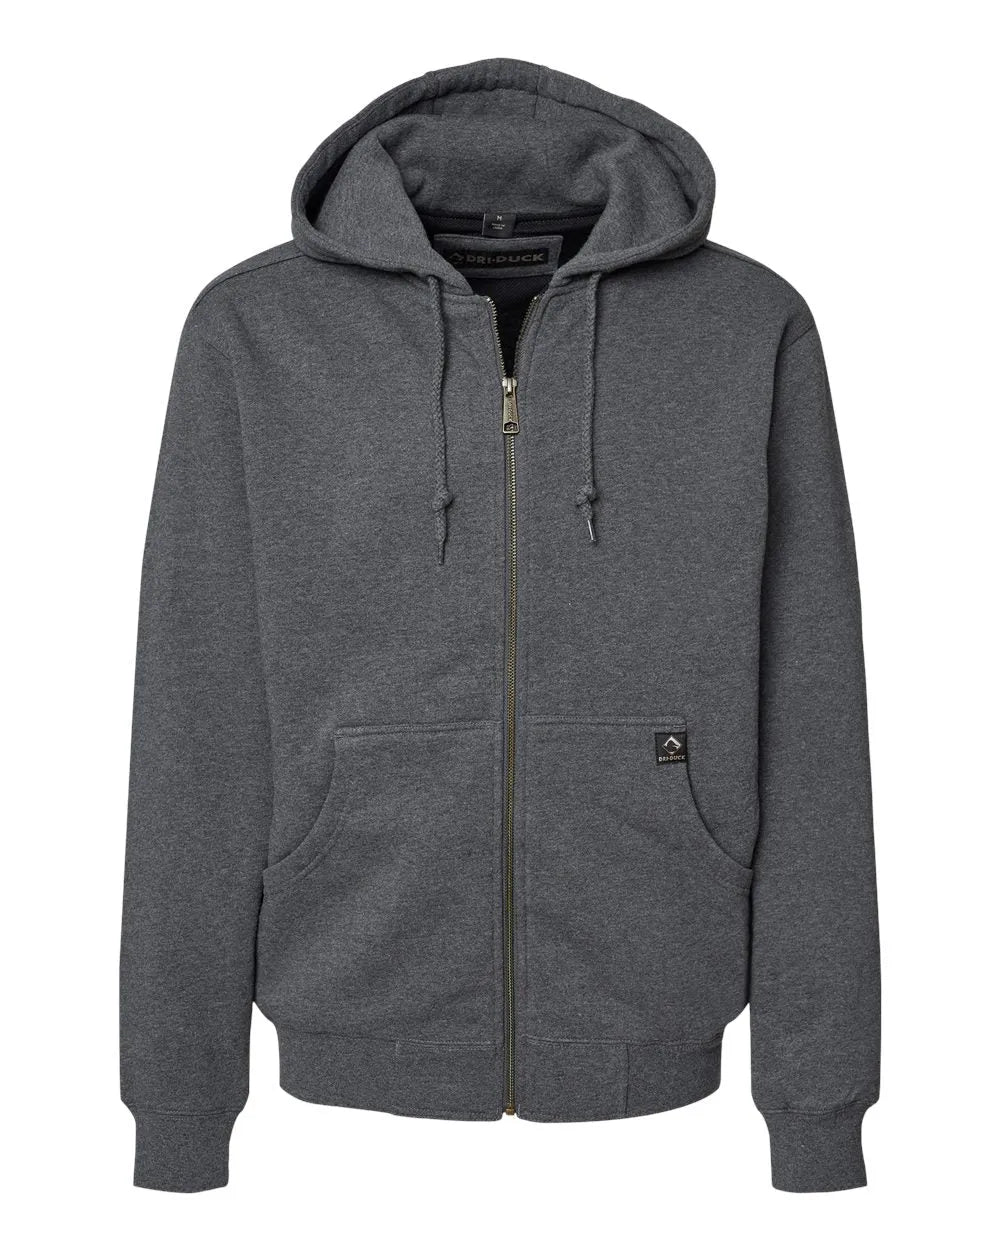 Crossfire Heavyweight Power Fleece Hooded Jacket with Thermal Lining - 7033 - Print Me Shirts